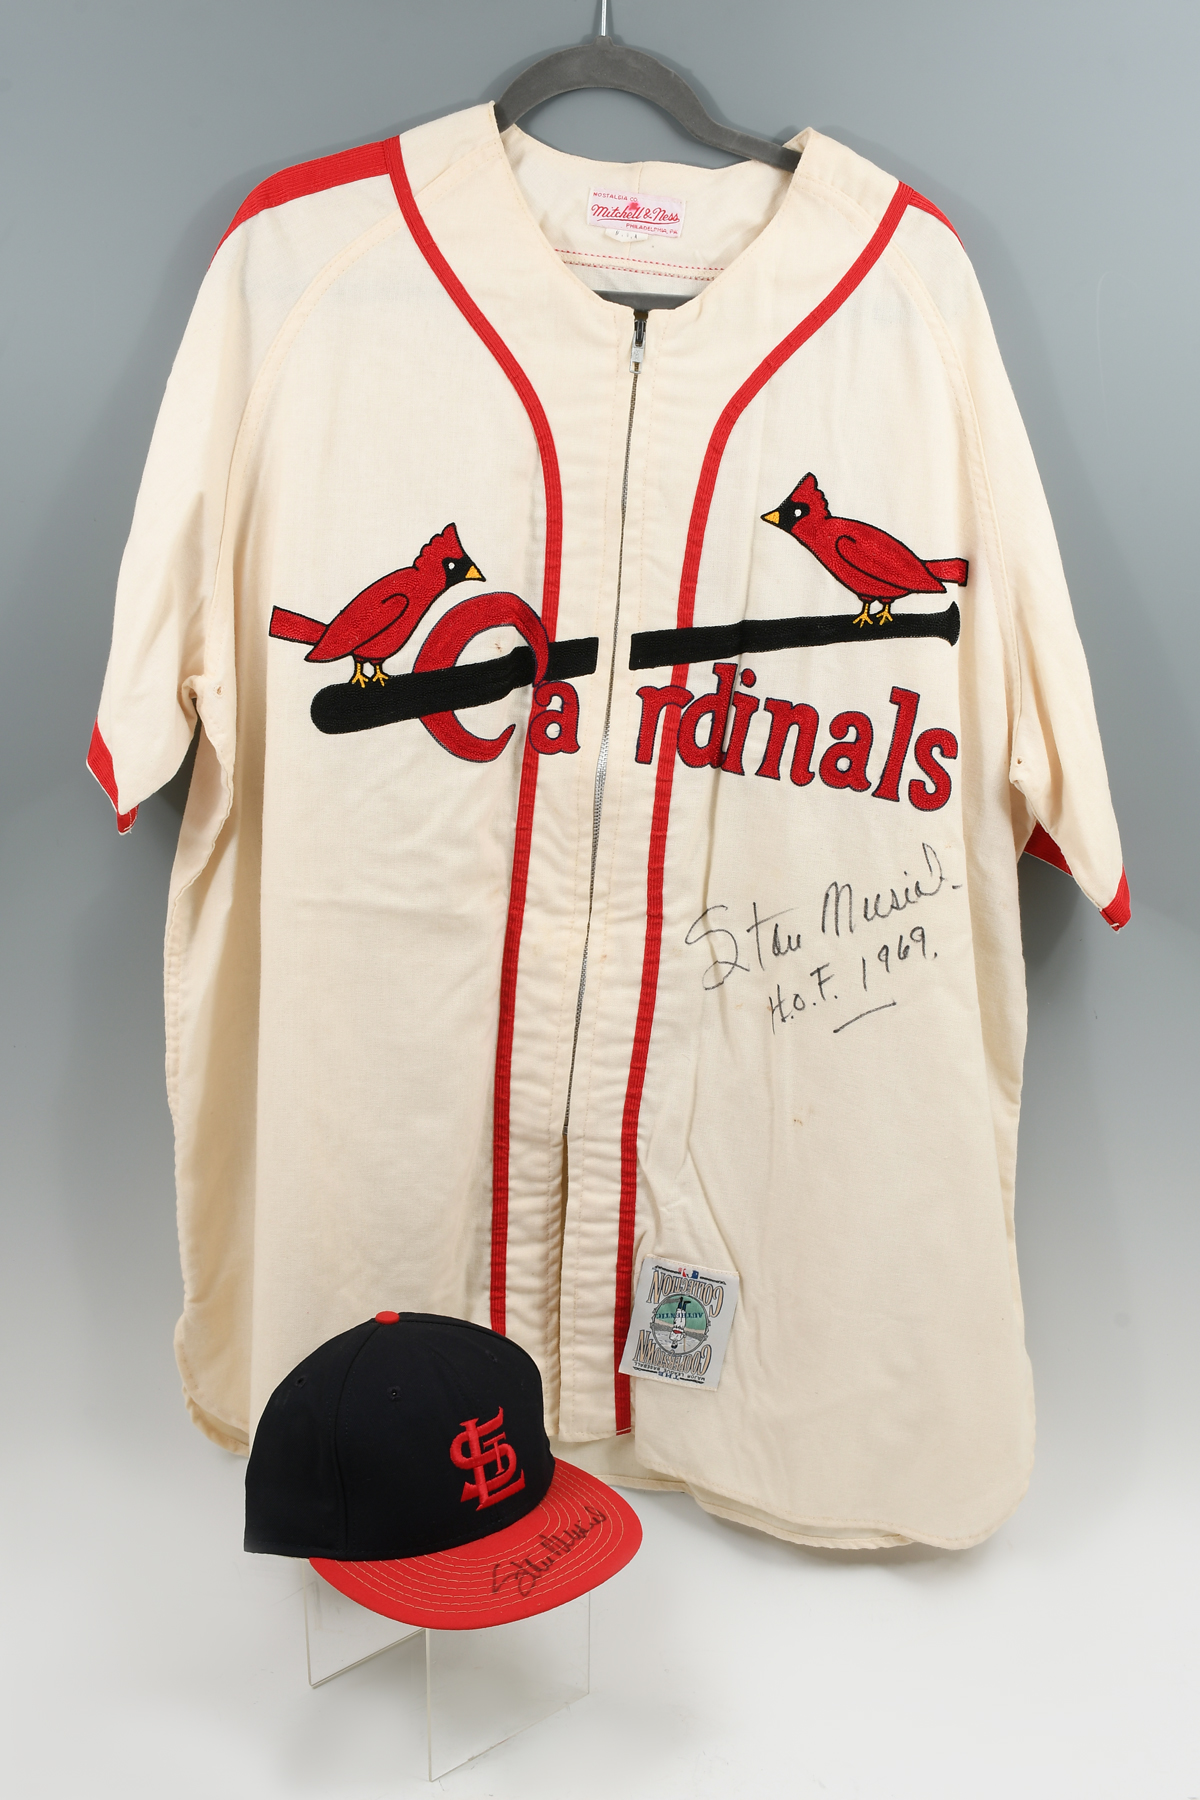 STAN MUSIAL AUTOGRAPHED JERSEY